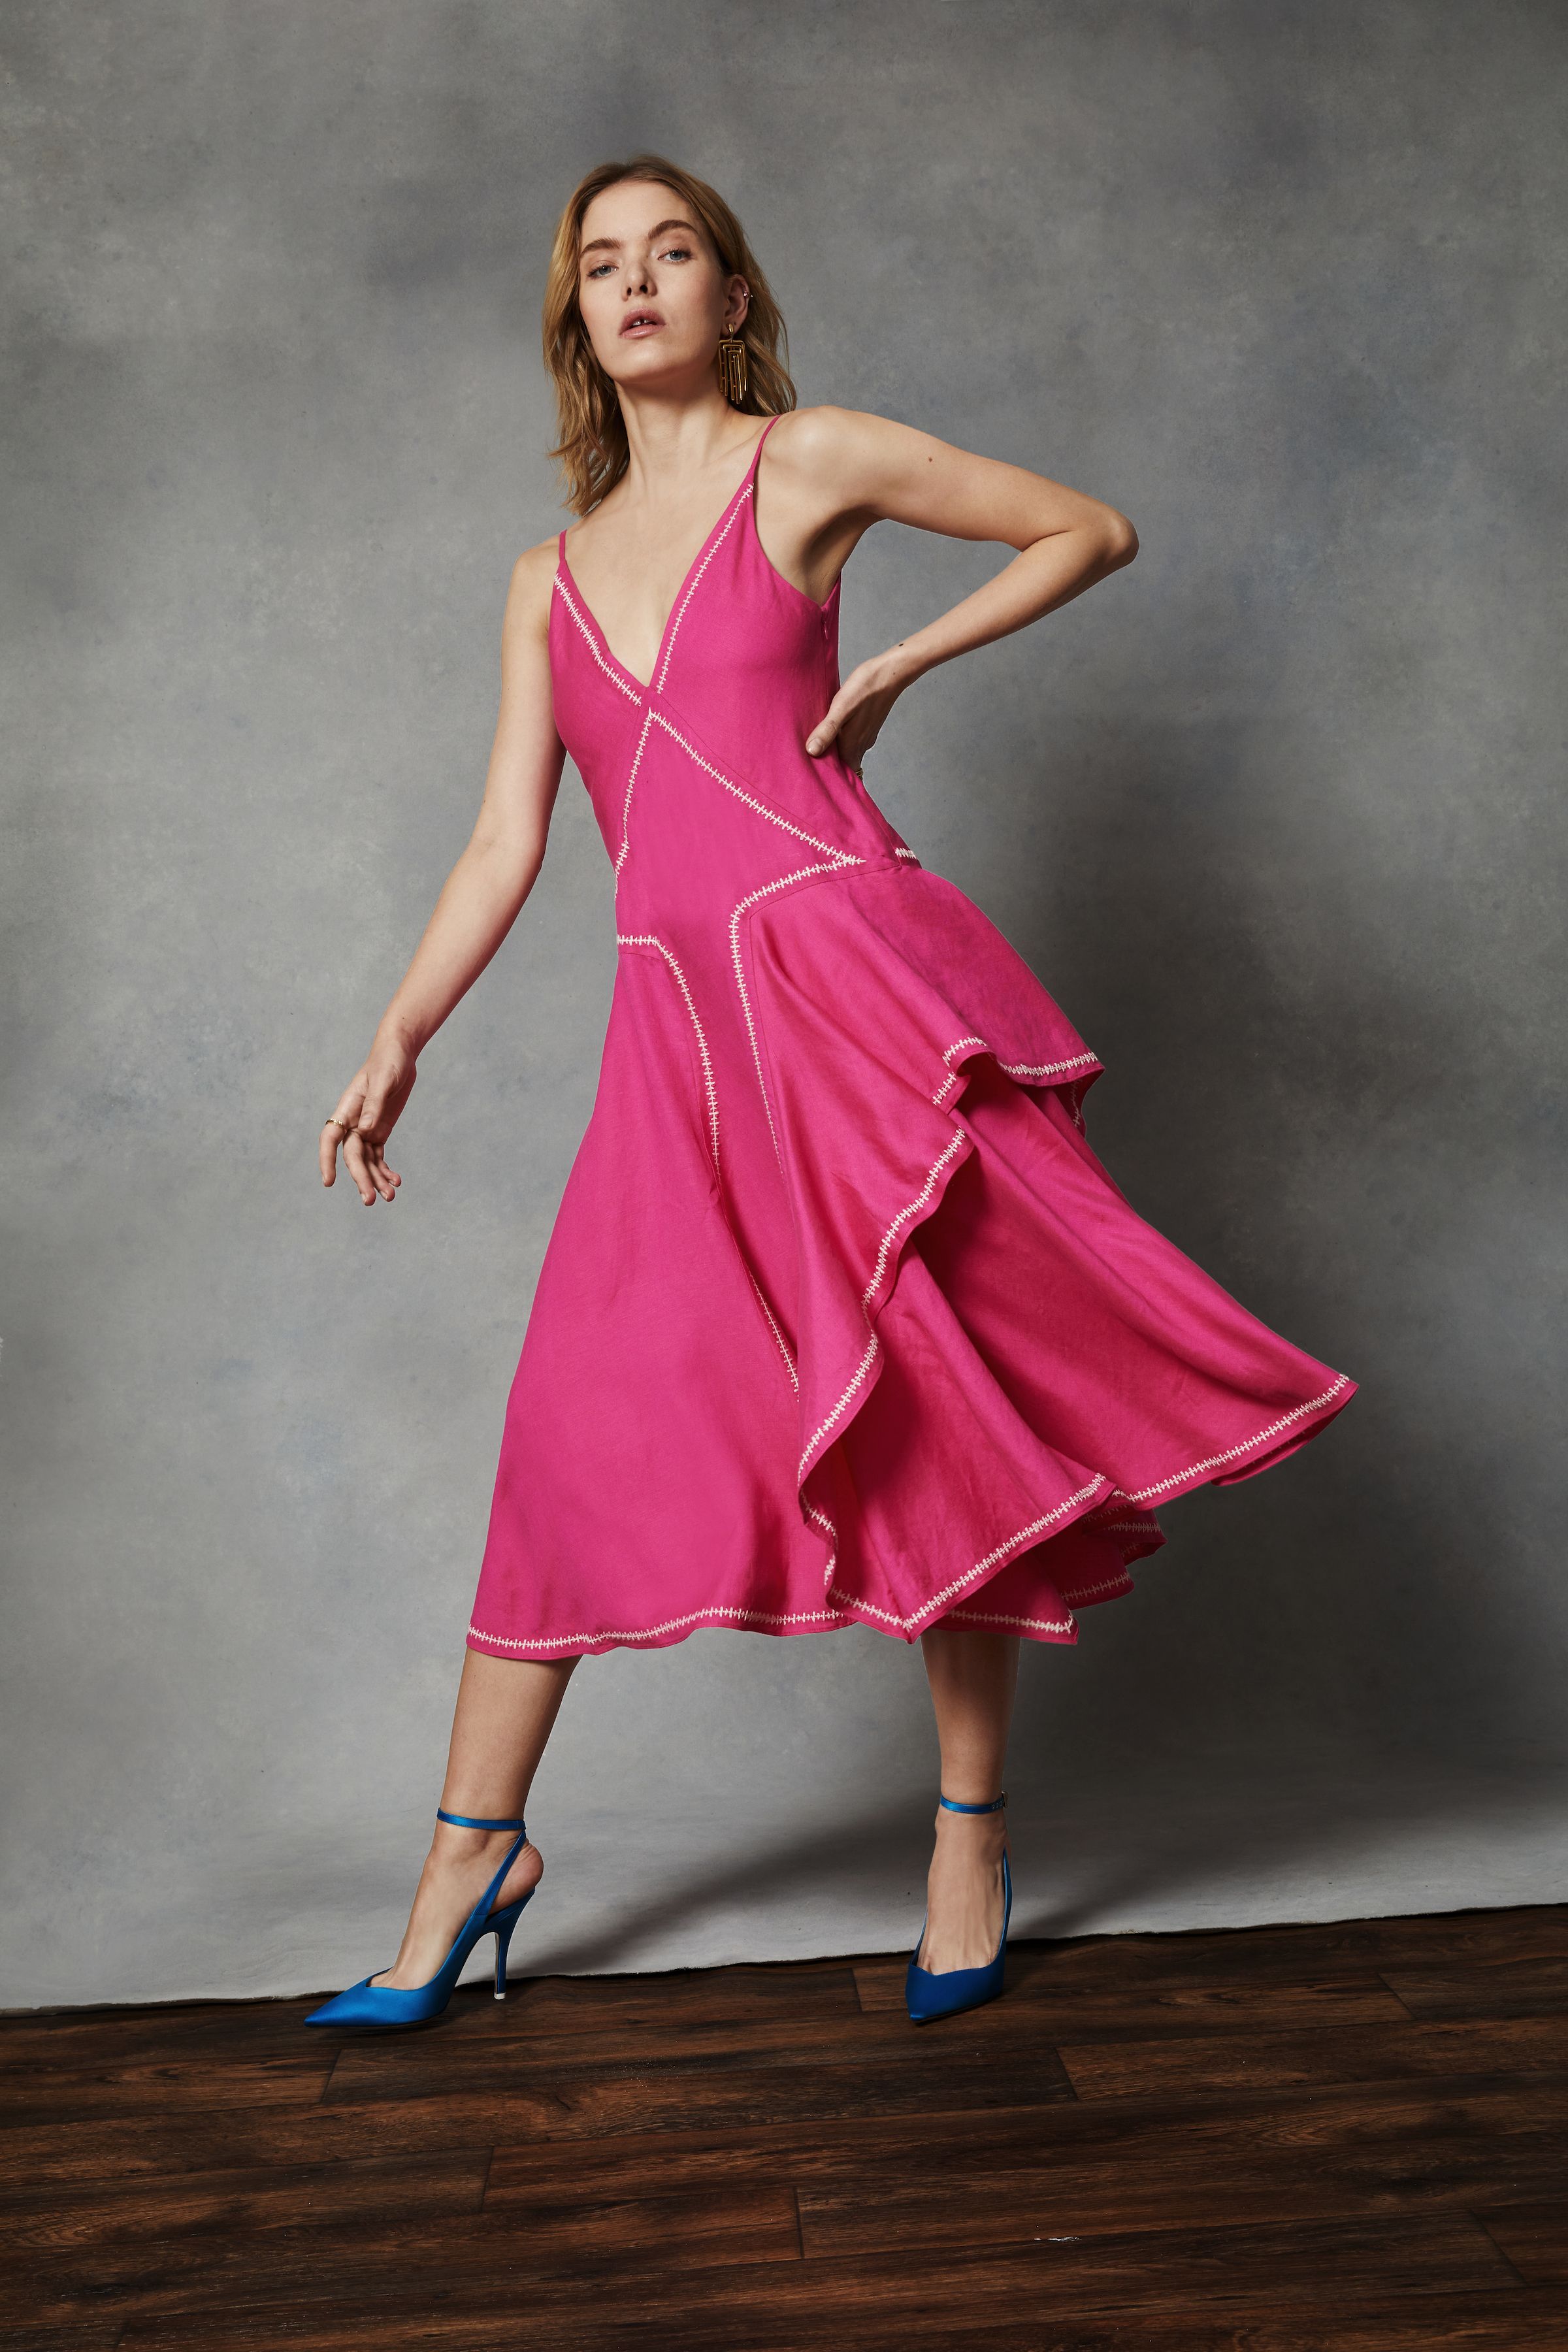 Shop Rent the Runway's New Designer Collaborations for Summer 2022